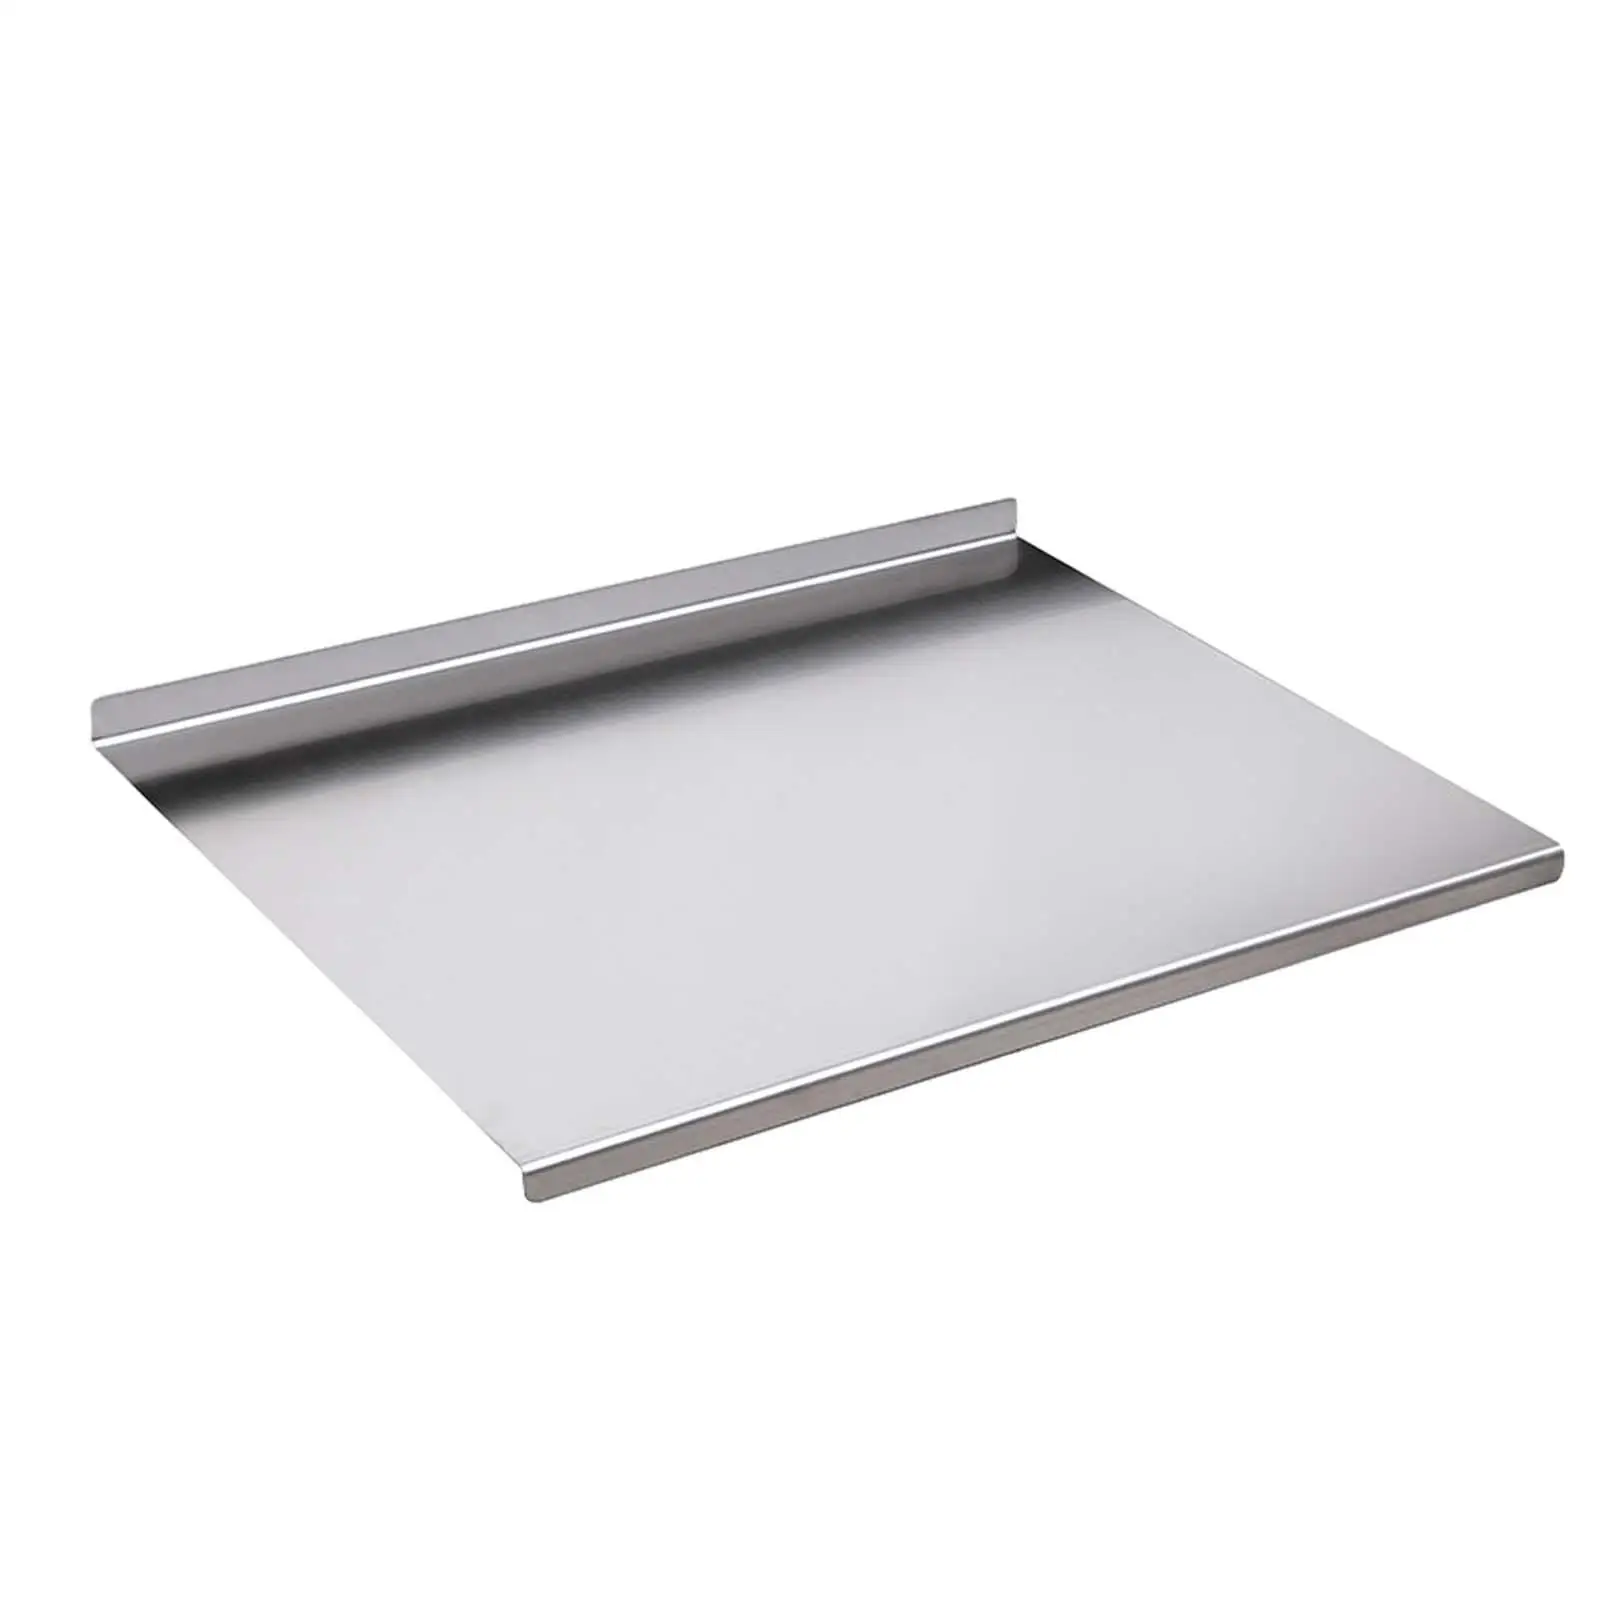 Stainless Steel Chopping Board Sturdy Kitchen Extra Large Pastry Board Thick